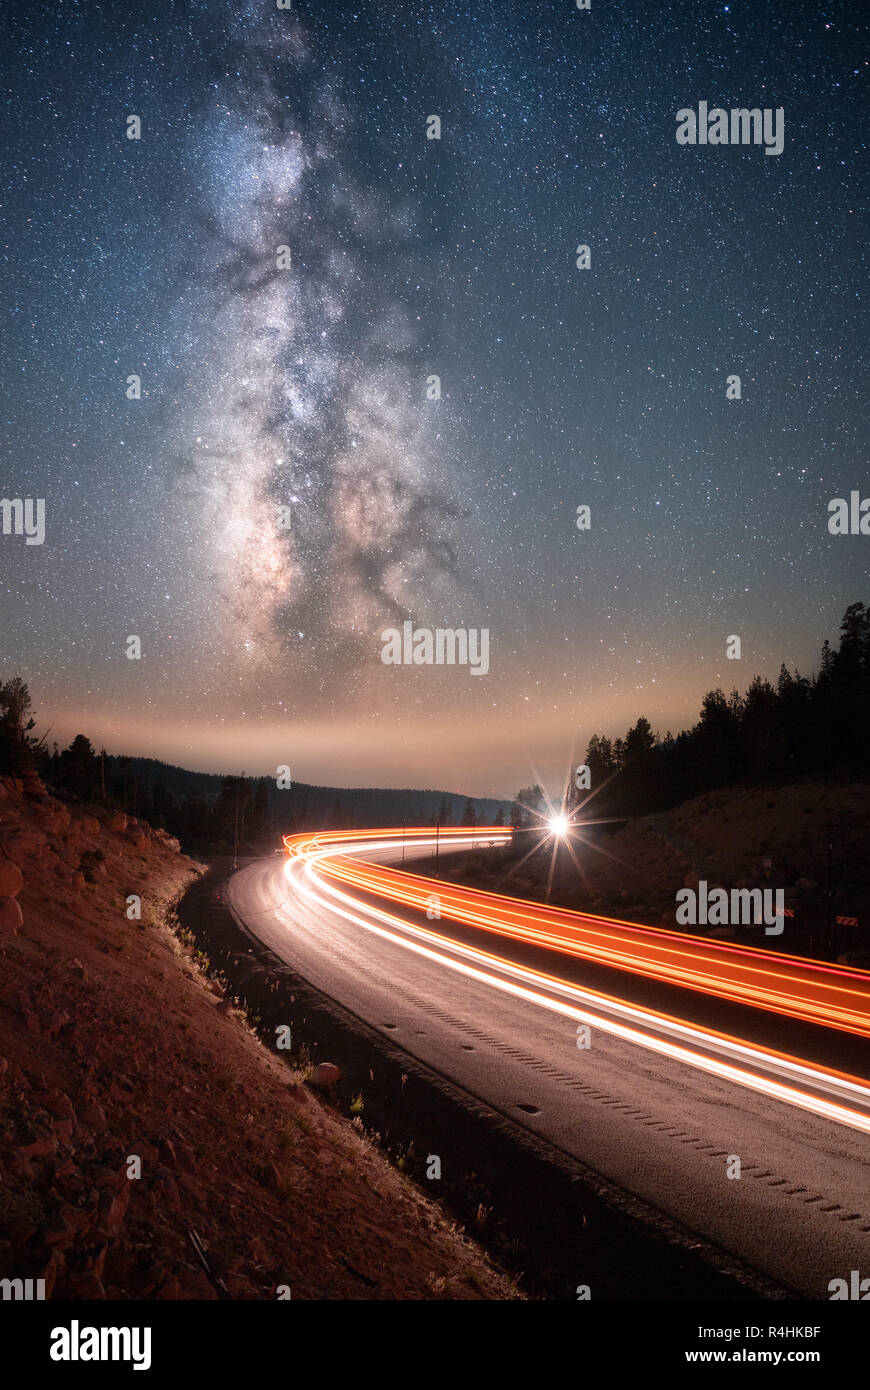 Milky Way above cars driving along a mountain road, Mt Rose, Nevada, United States Stock Photo